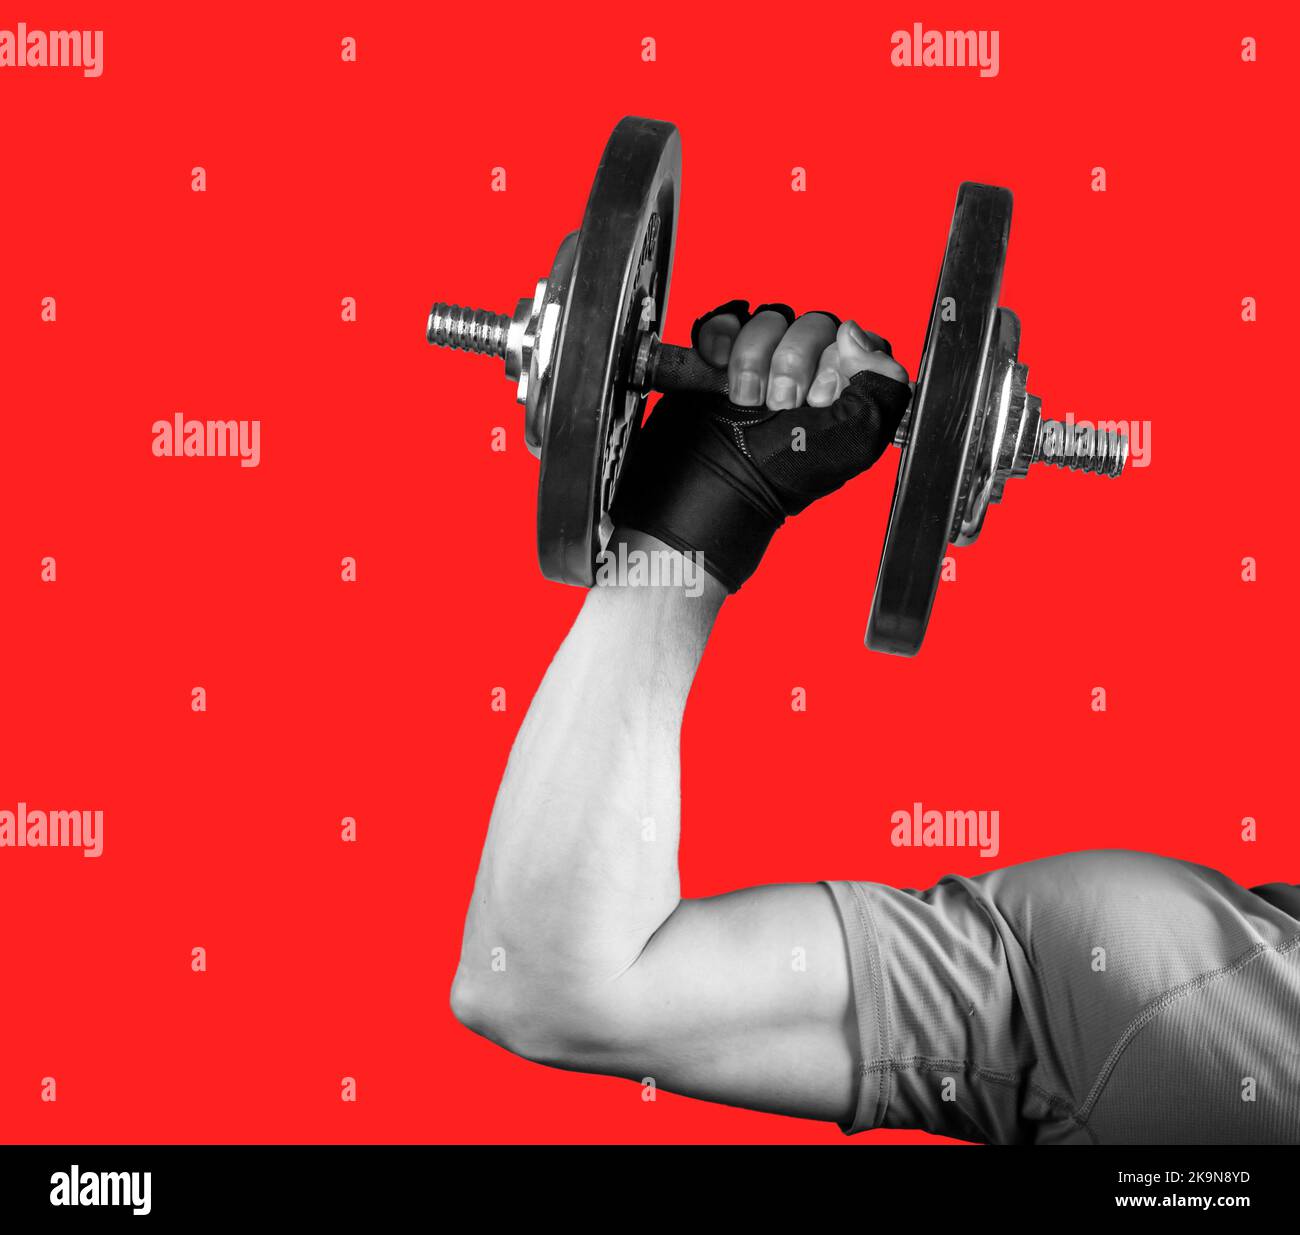 https://c8.alamy.com/comp/2K9N8YD/strong-arm-hand-lifting-dumbbell-close-up-for-biceps-pumping-sport-concept-high-quality-photo-2K9N8YD.jpg